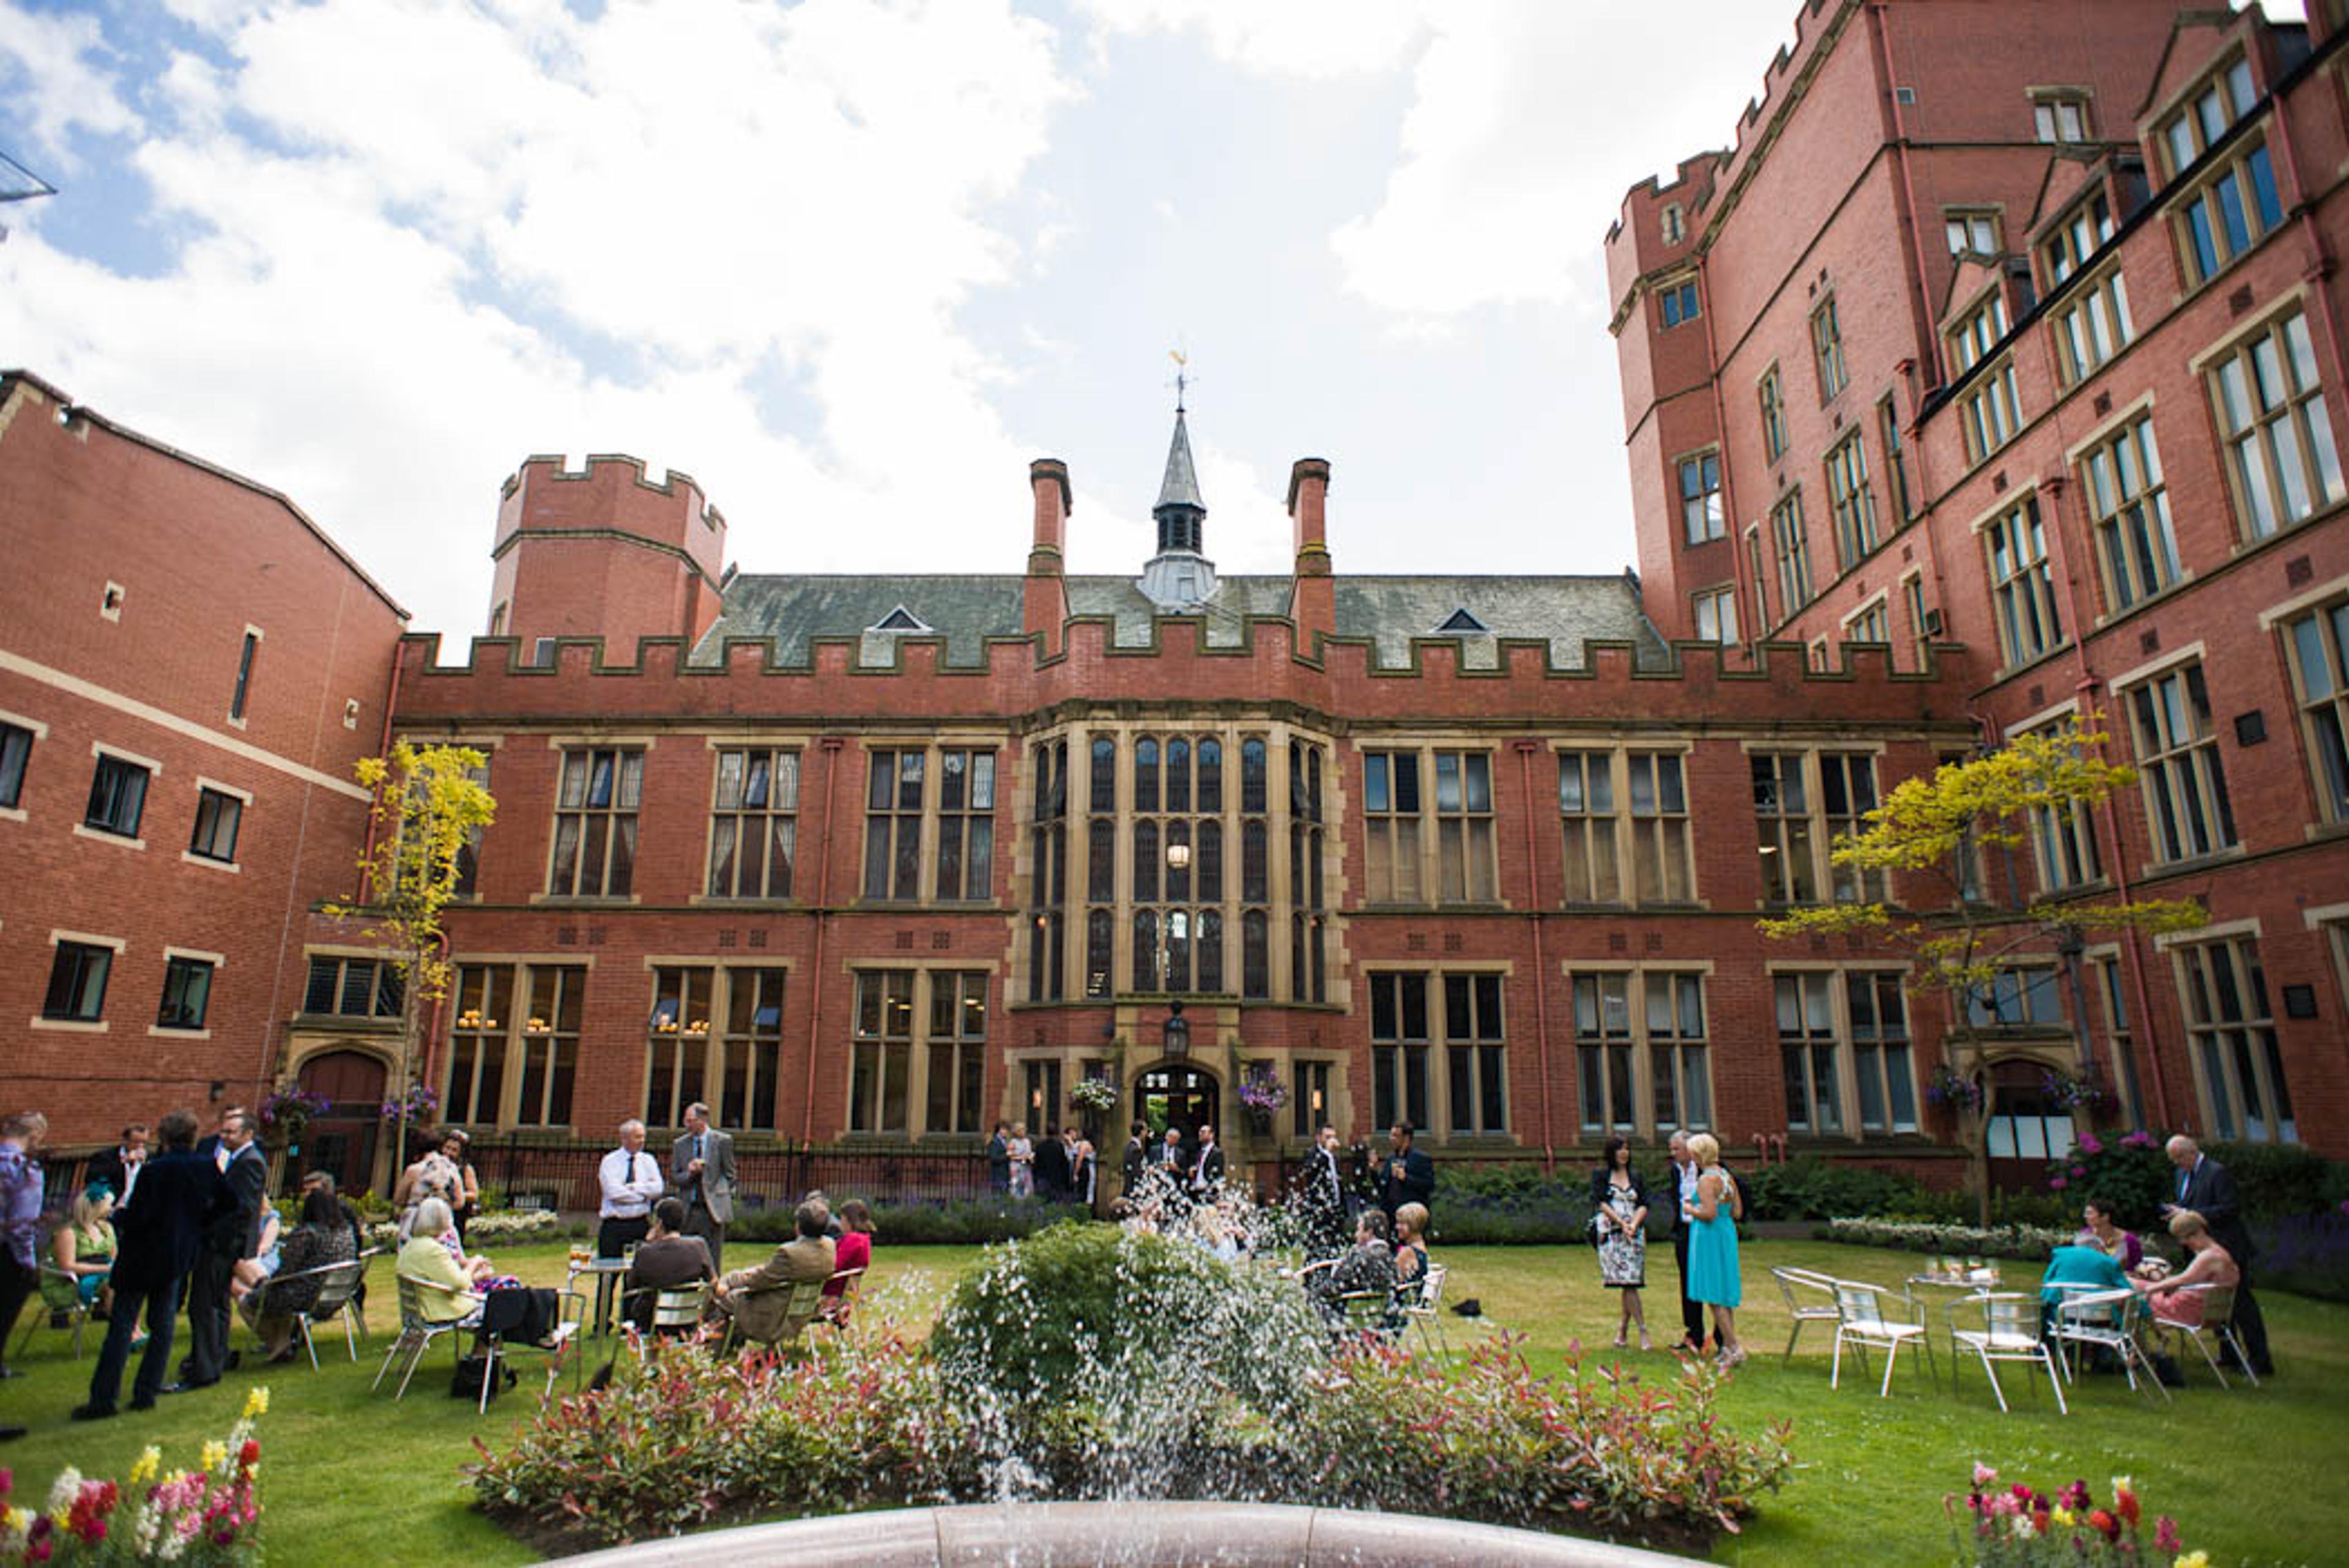 A courtyard featuring a fountain and a lawn, and formally-dressed people in front of a red brick building. The building is the University of Sheffield's Firth Court.